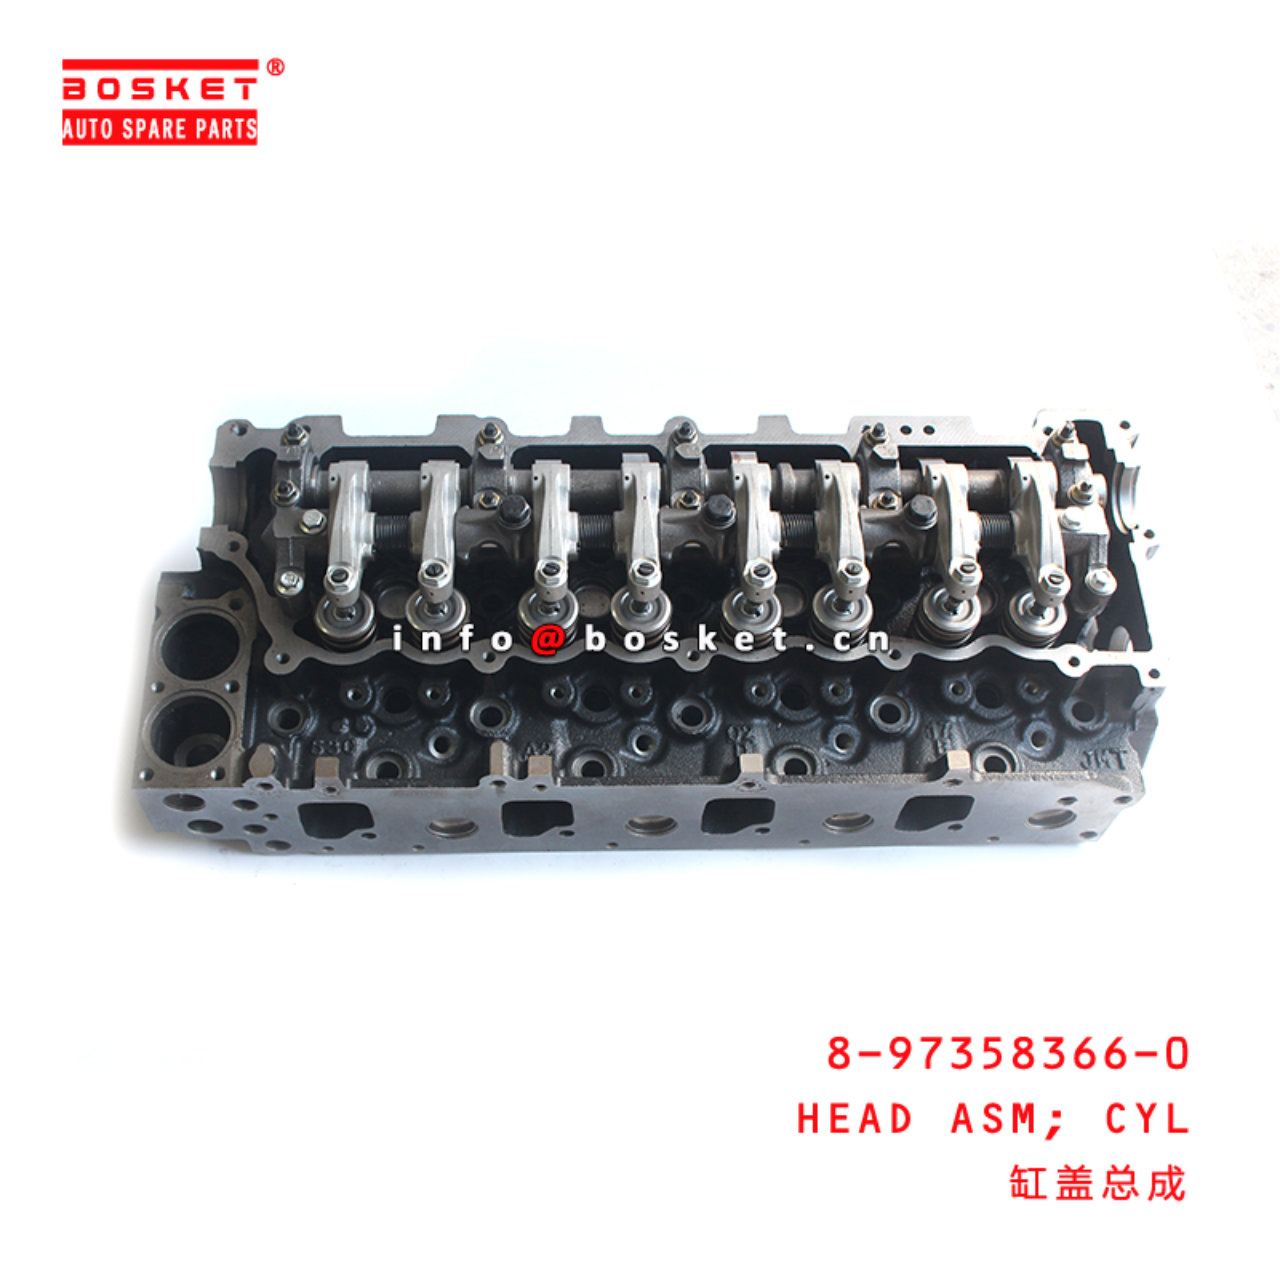 8-97358366-0 Cylinder Head Assembly Suitable for ISUZU NPR 4HE1 